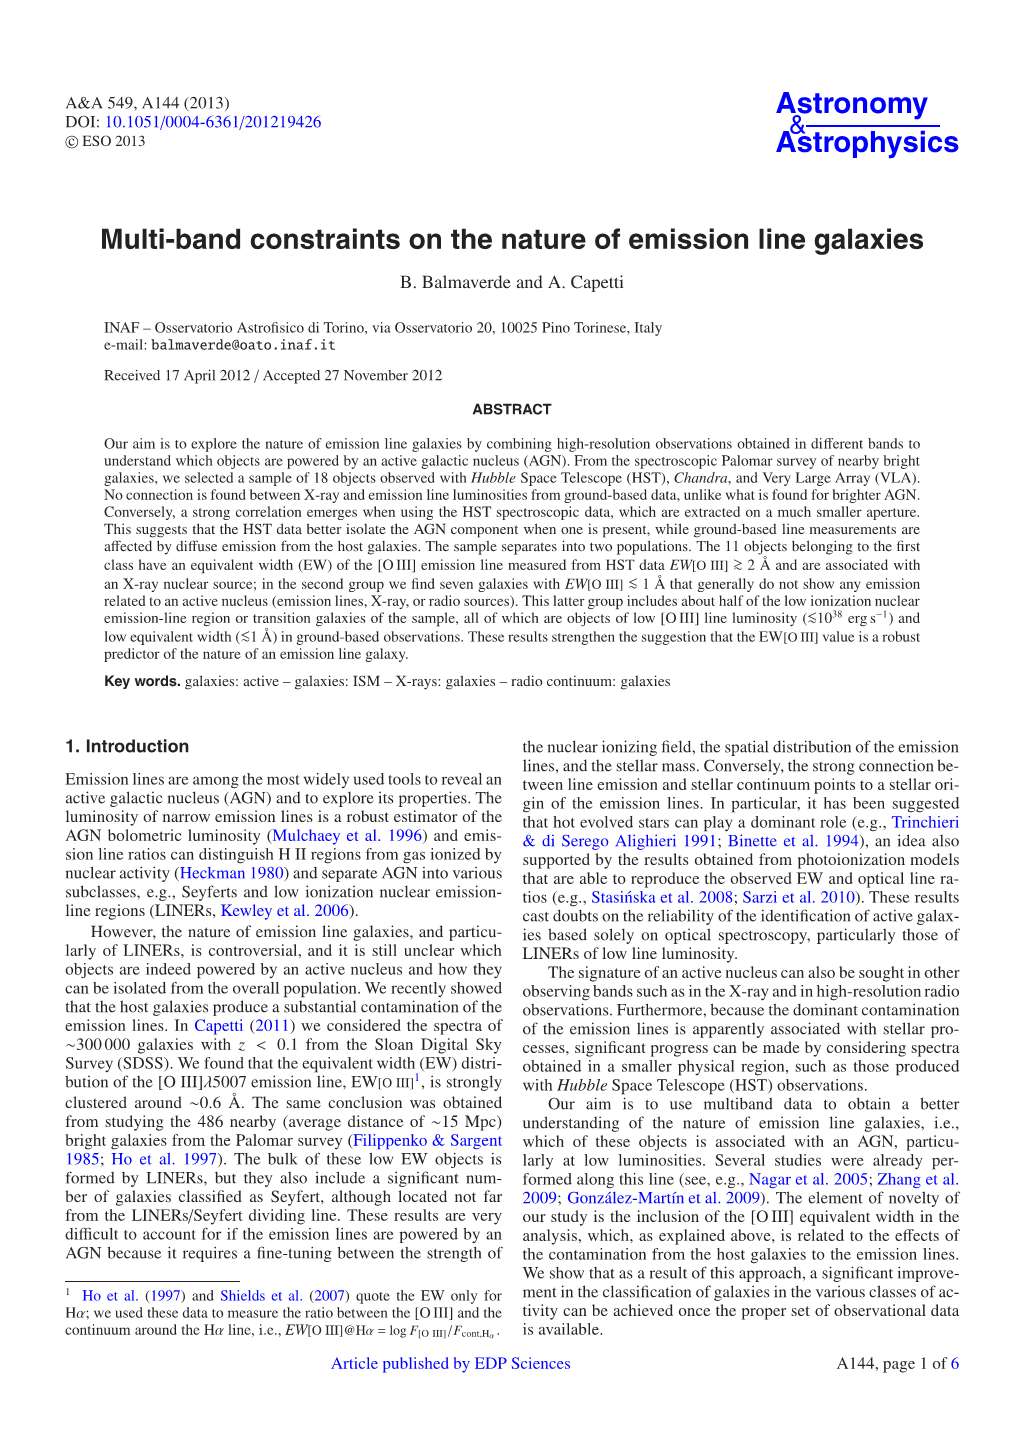 Multi-Band Constraints on the Nature of Emission Line Galaxies